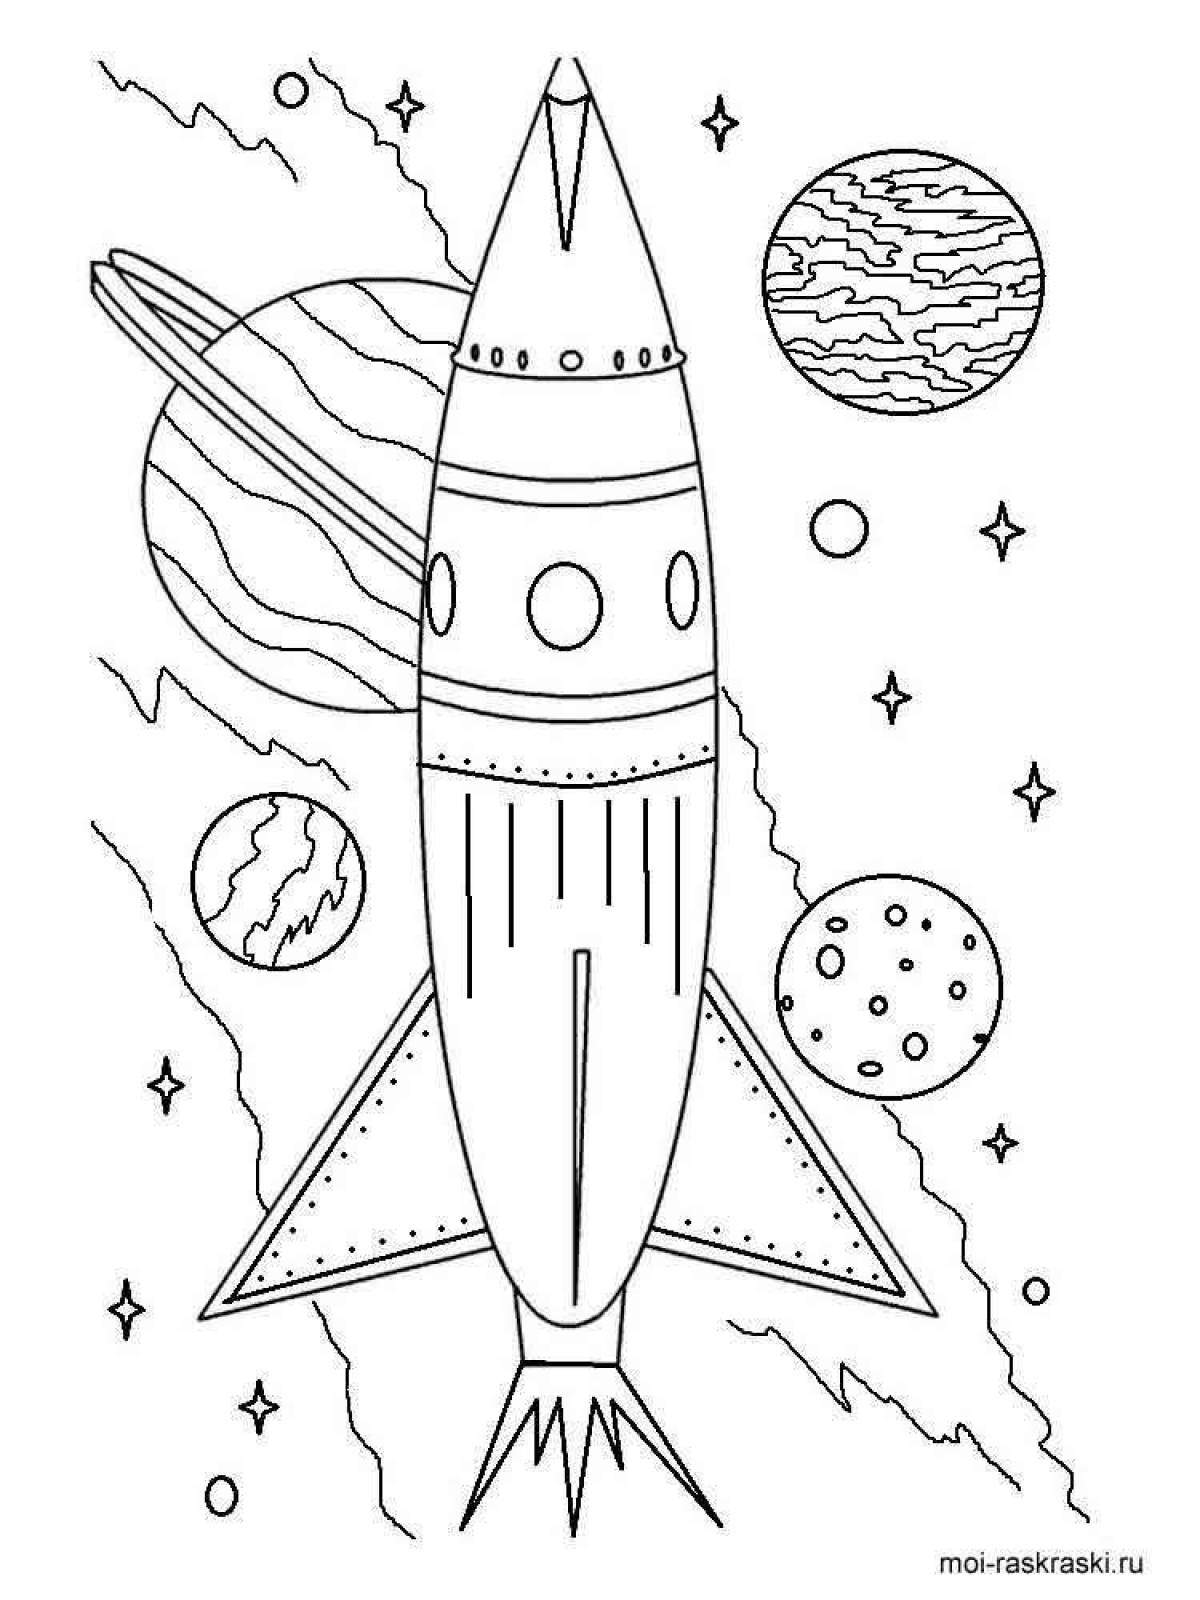 Exciting rocket coloring book for 6-7 year olds